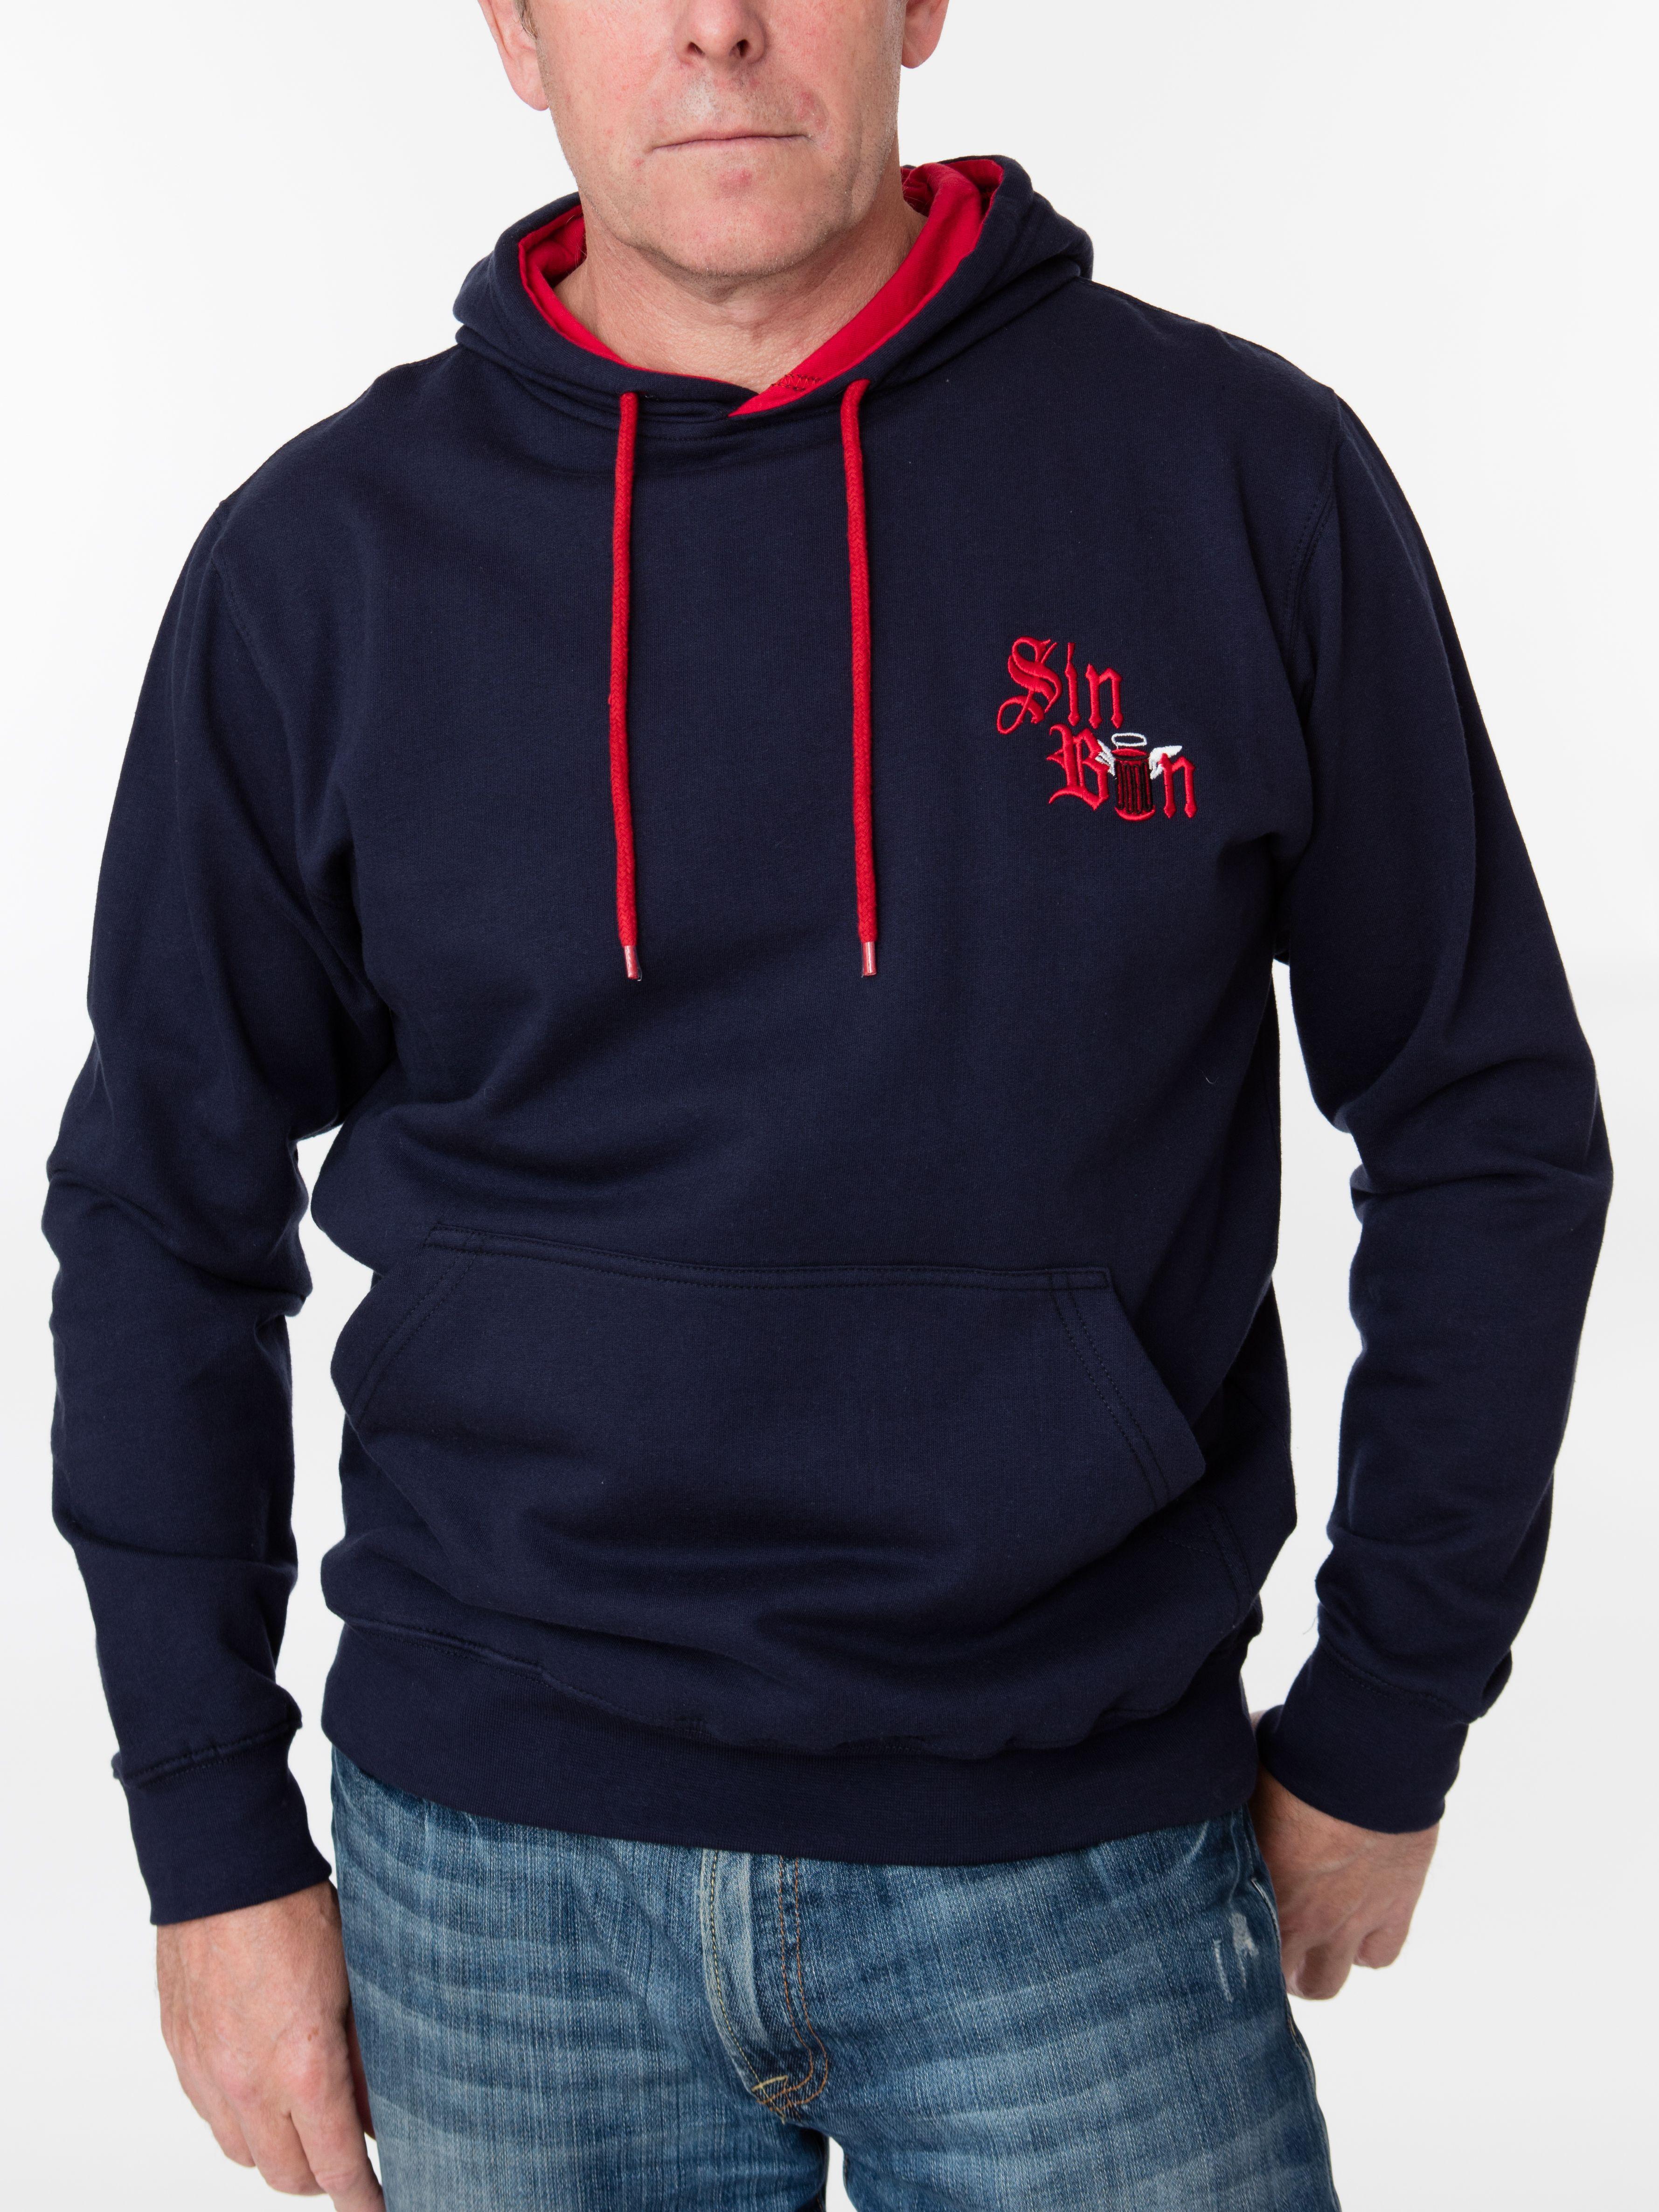 Red Clothing and Apparel Logo - Sin Bin Hooded Sweatshirt in Navy Blue with Red Logo and Detail ...